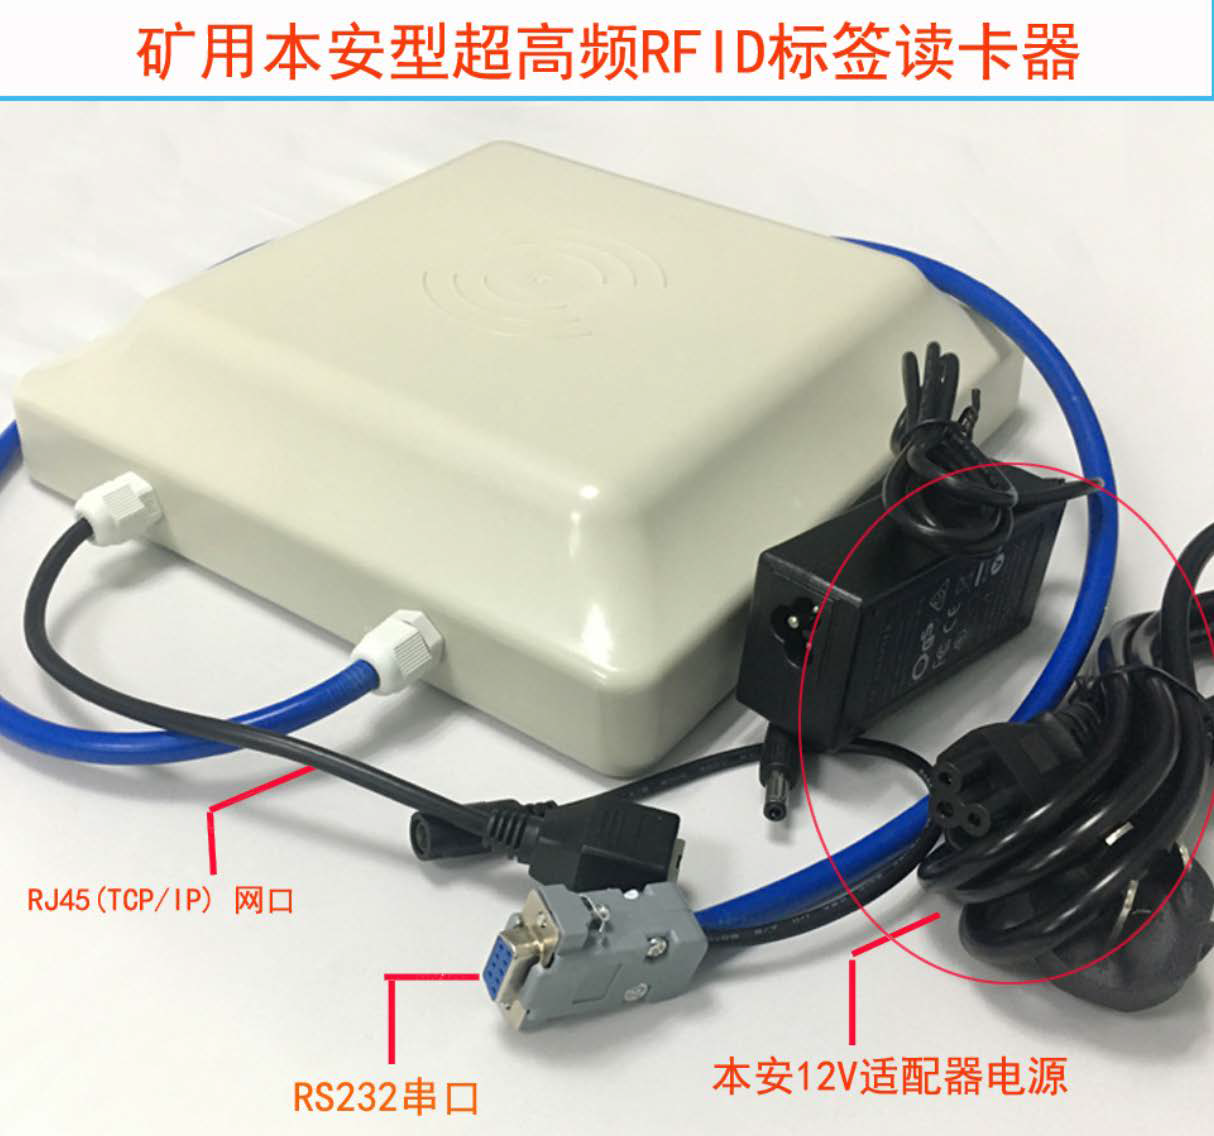 Intrinsically safe integrated ultra-high frequency RFID card reader, mining identifier RJ45 232 485 interface